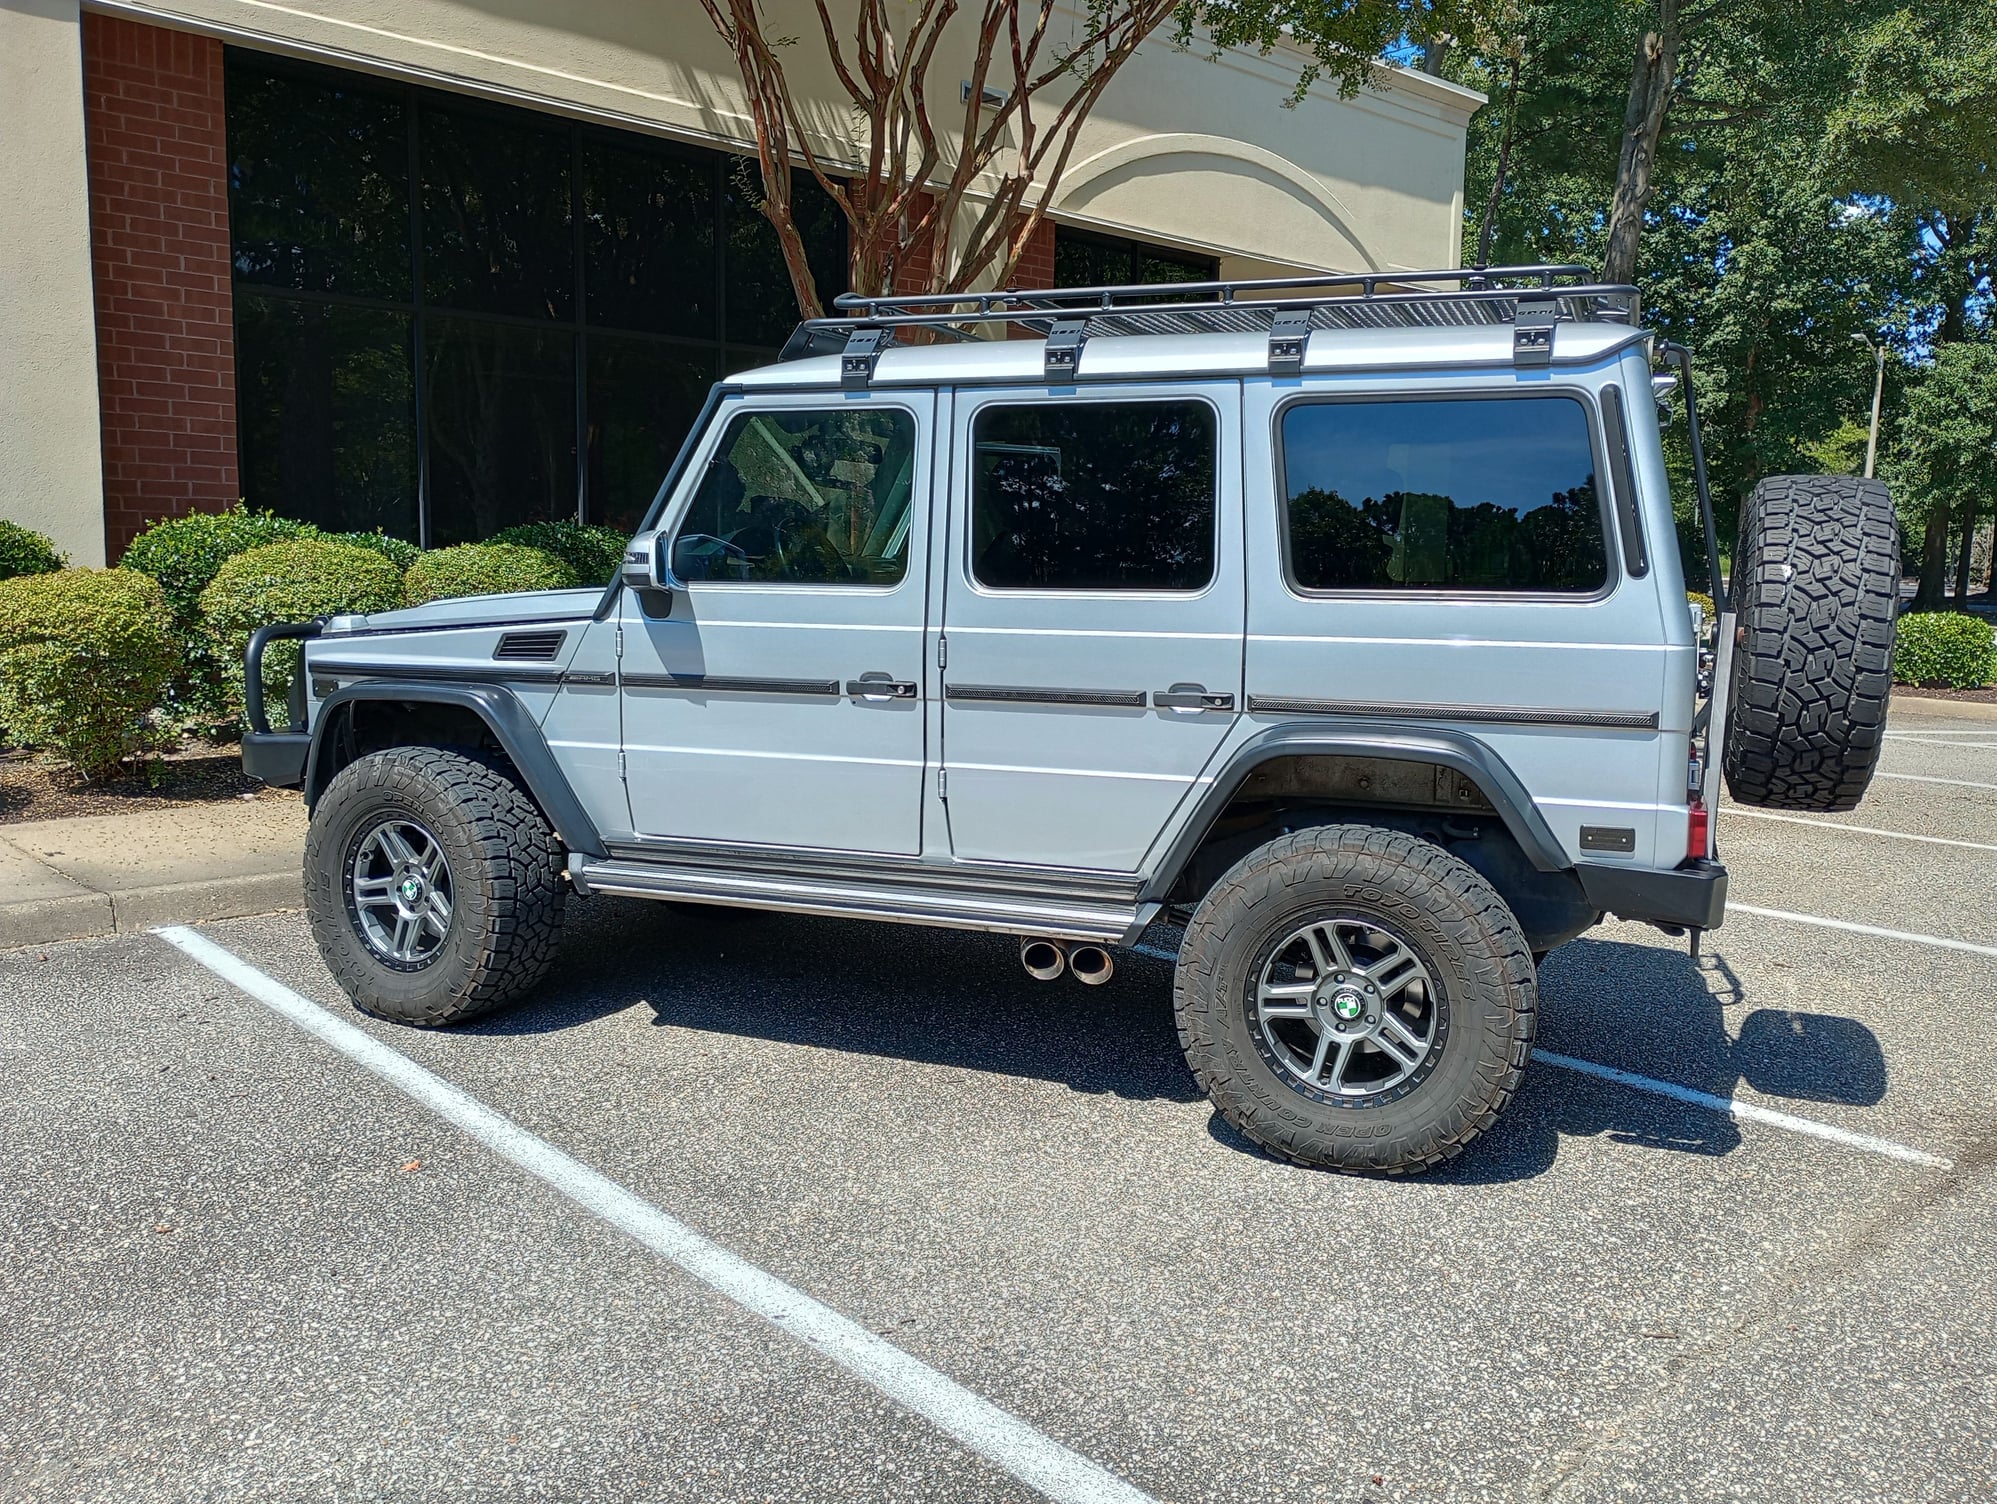 Wheels and Tires/Axles - G wagon setup - Alpha Grenades in 18x9et 25 with 325/65/18 Toyo AT3's - set of 5 - Used - 1979 to 2018 Mercedes-Benz G-Class - Newport News, VA 23607, United States